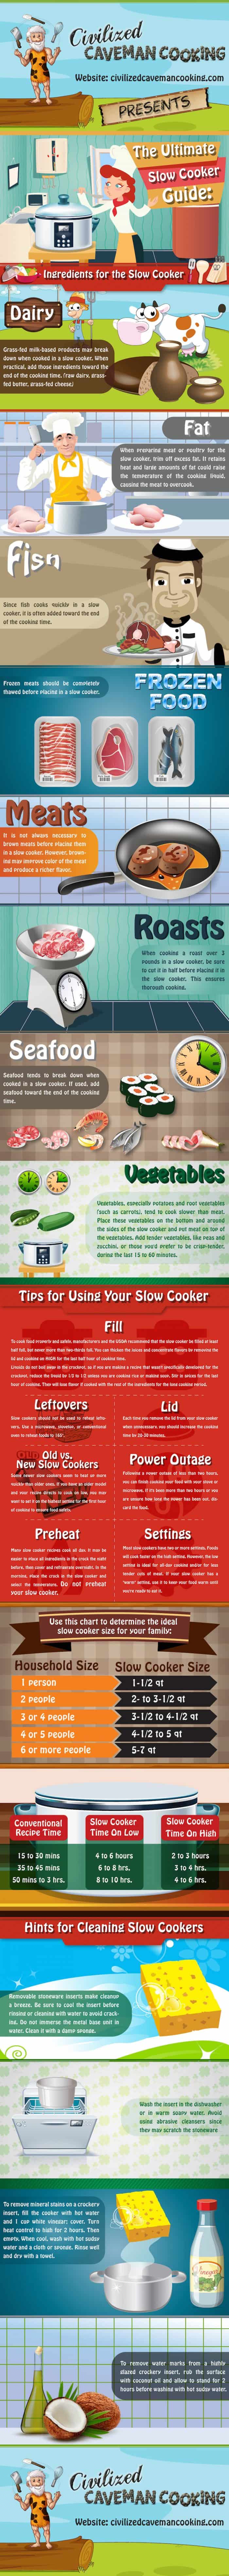 Ultimate Slow Cooker Cooking Guide Infographic